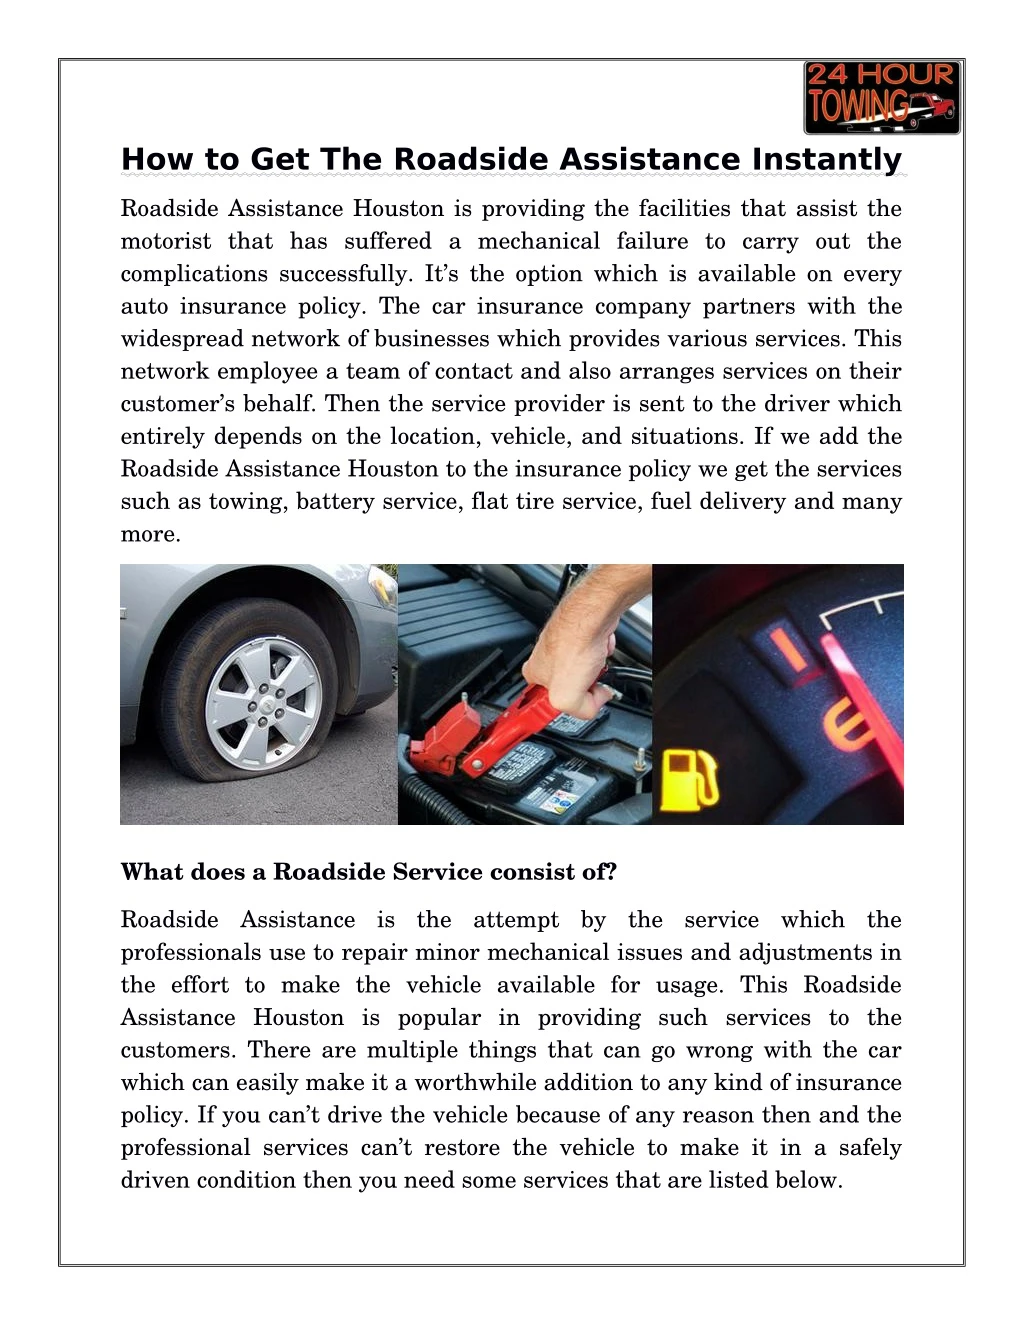 how to get the roadside assistance instantly